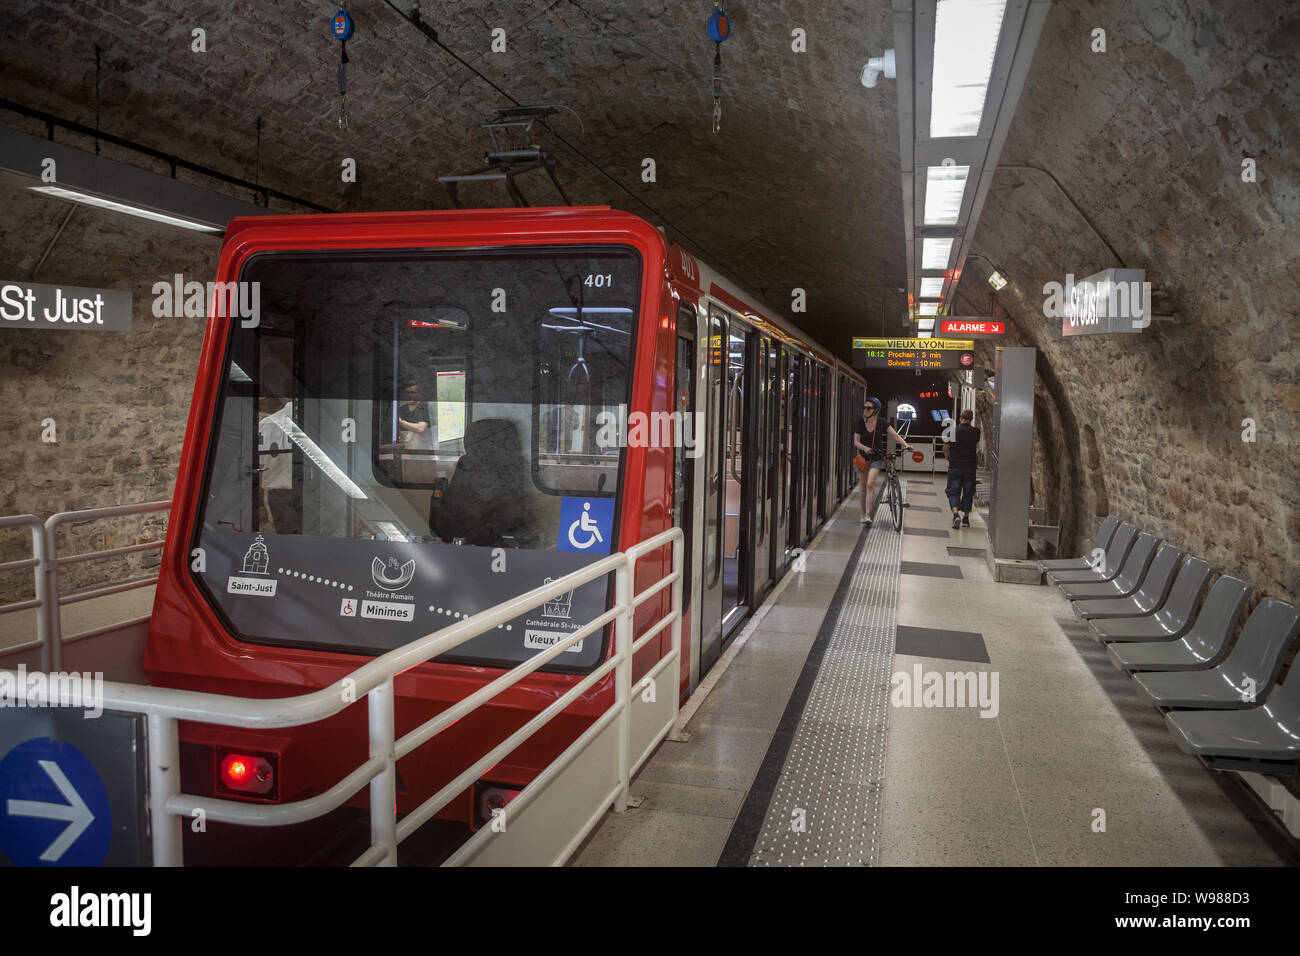 LYON, FRANCE - JULY 19, 2019: Lyon Funicular Railway train entering the station of St Just with tourists preparing to enter, before bringing them to V Stock Photo